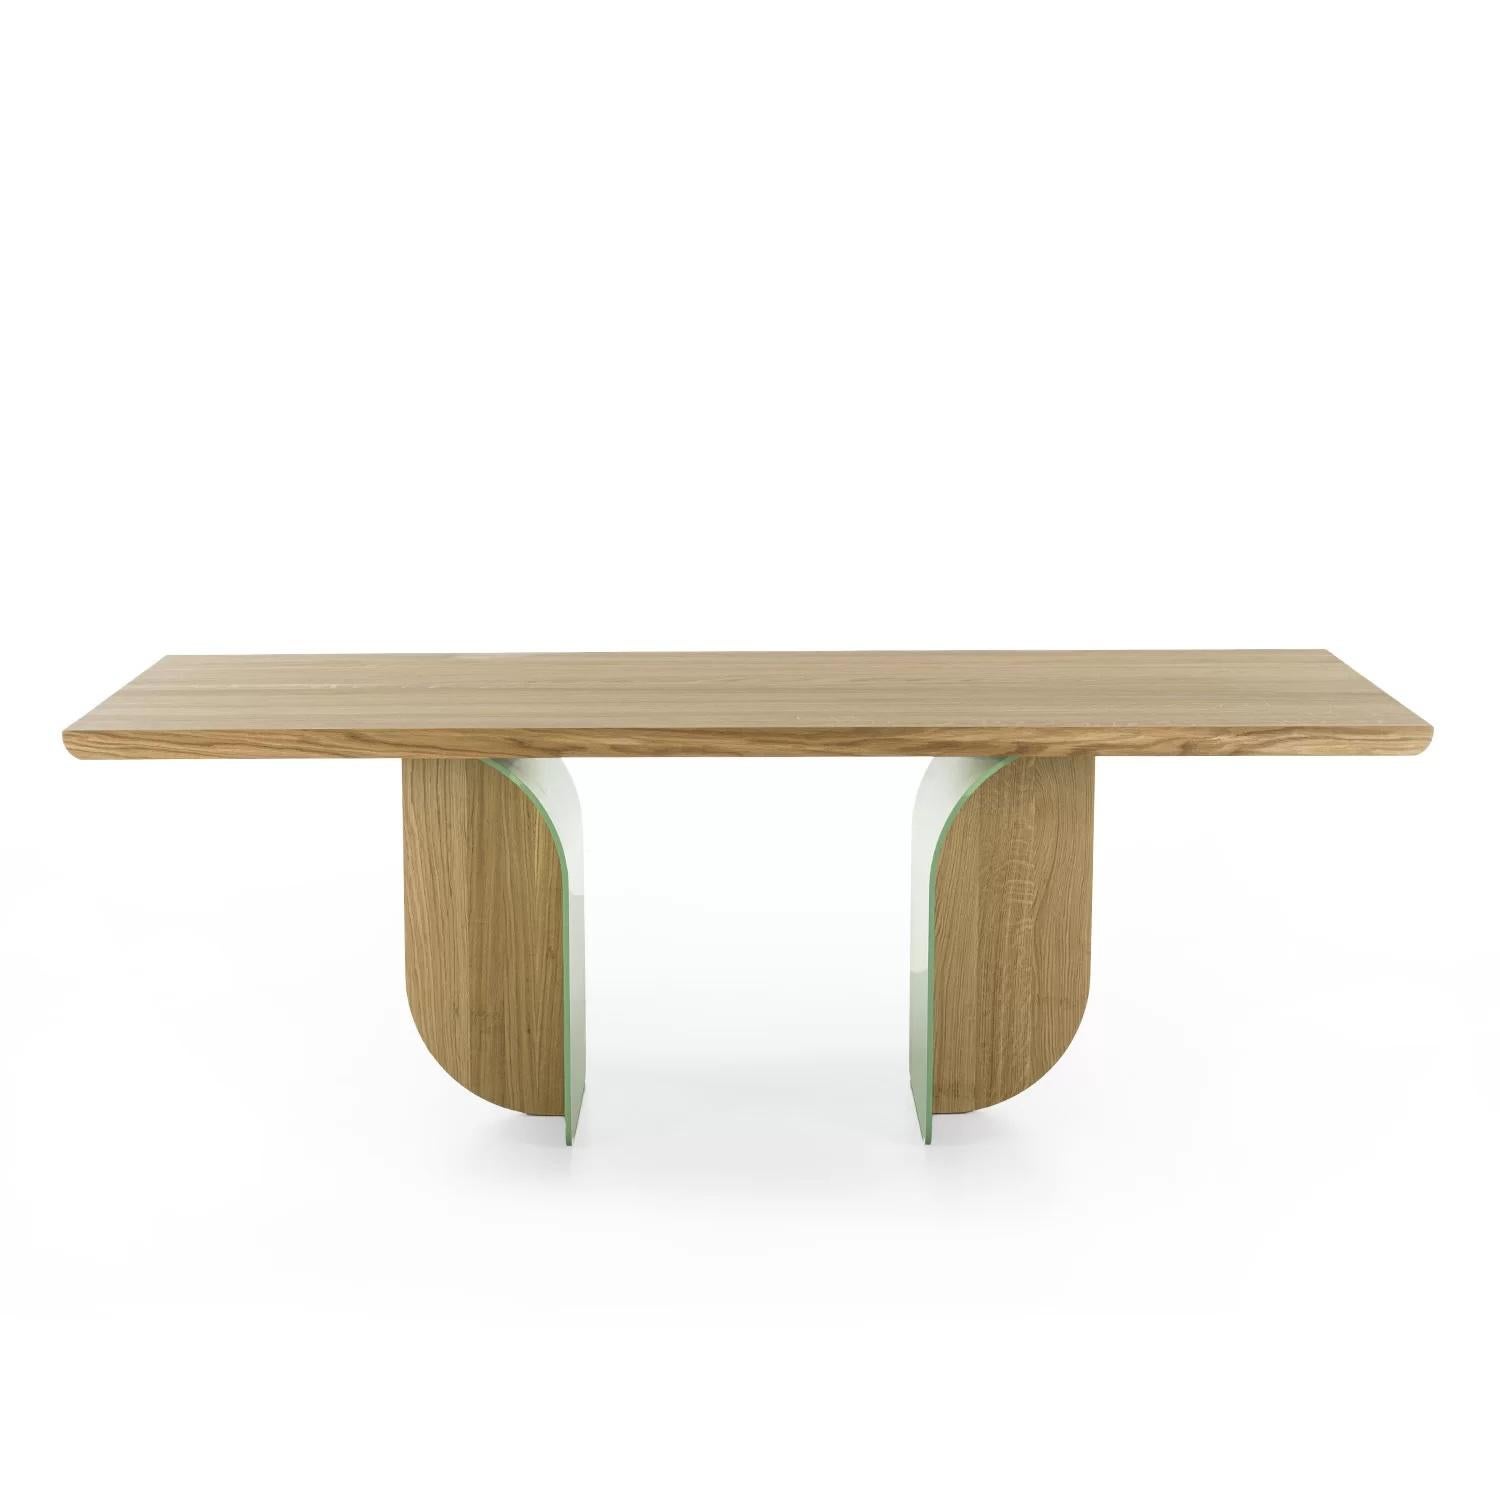 Table with a solid wood top with glued slats, with rounded corners, characterized by its legs, born from the union of iron and wood and created to look different depending on which angle they’re seen from.

Available in a variety of different sizes